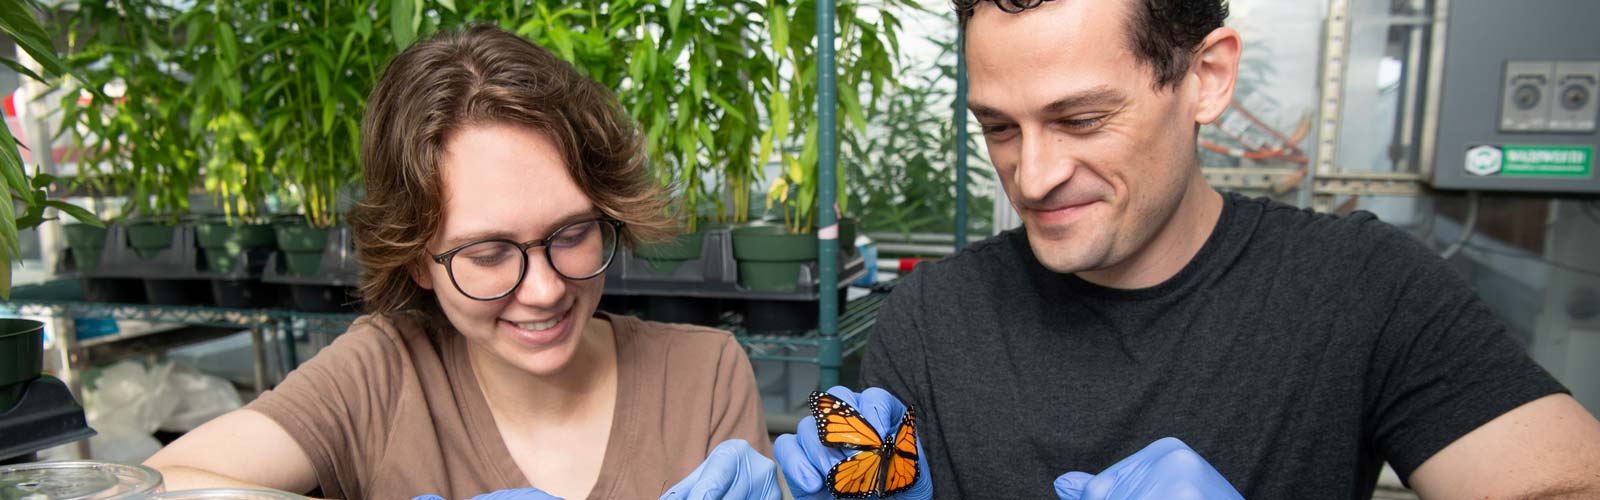 Lab members examining a butterfly